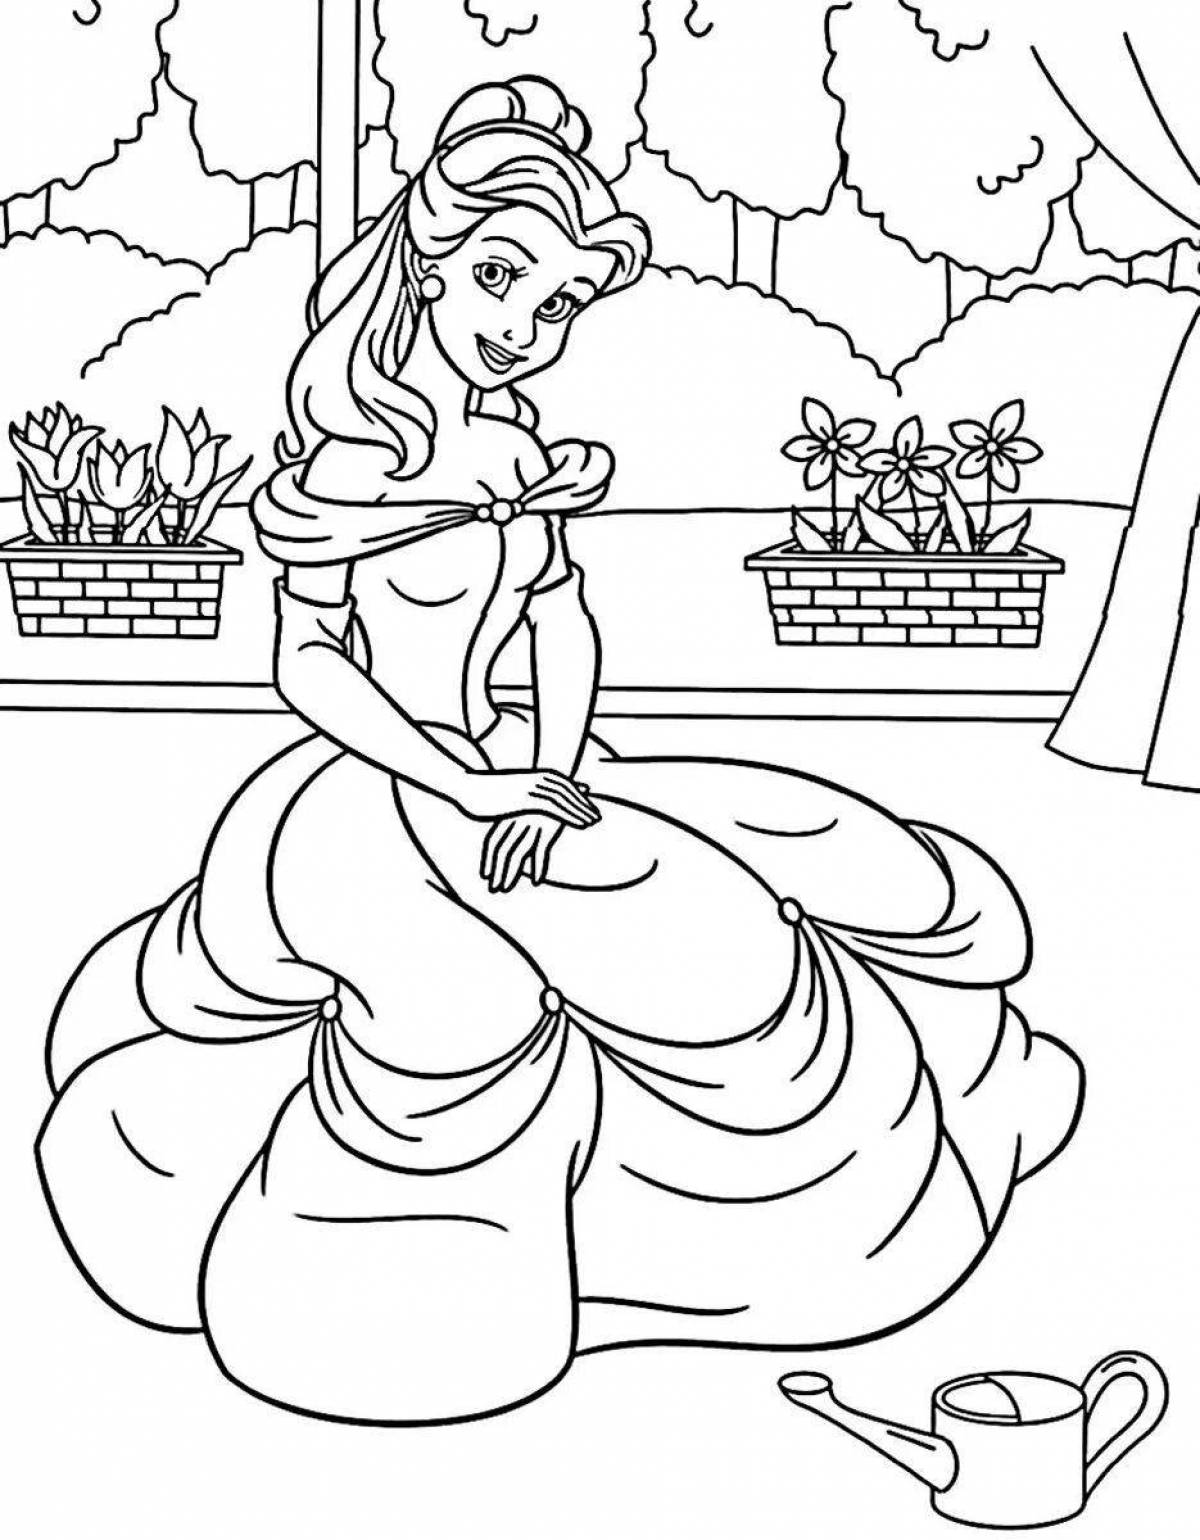 Fun coloring princess for girls 4 years old